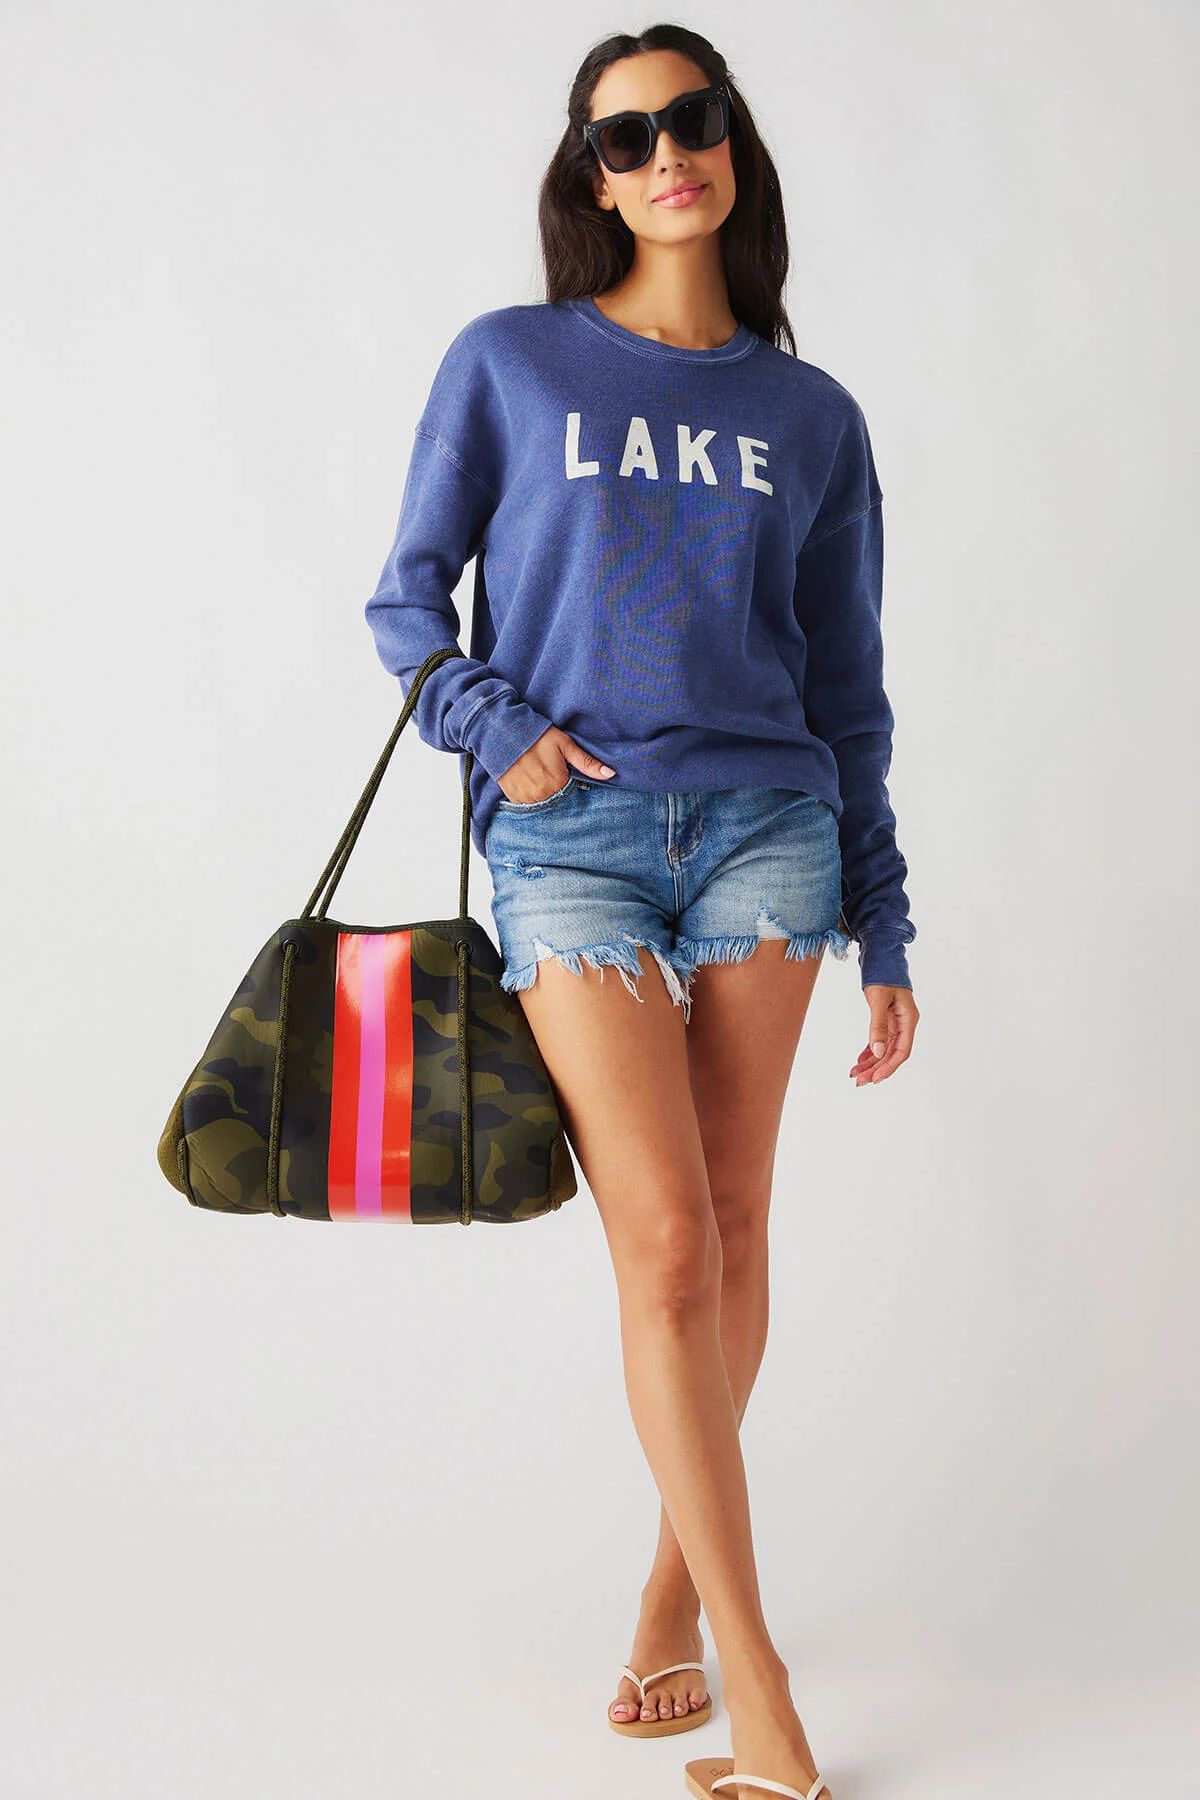 Oat Collective Lake Mineral Wash Sweatshirt | Social Threads